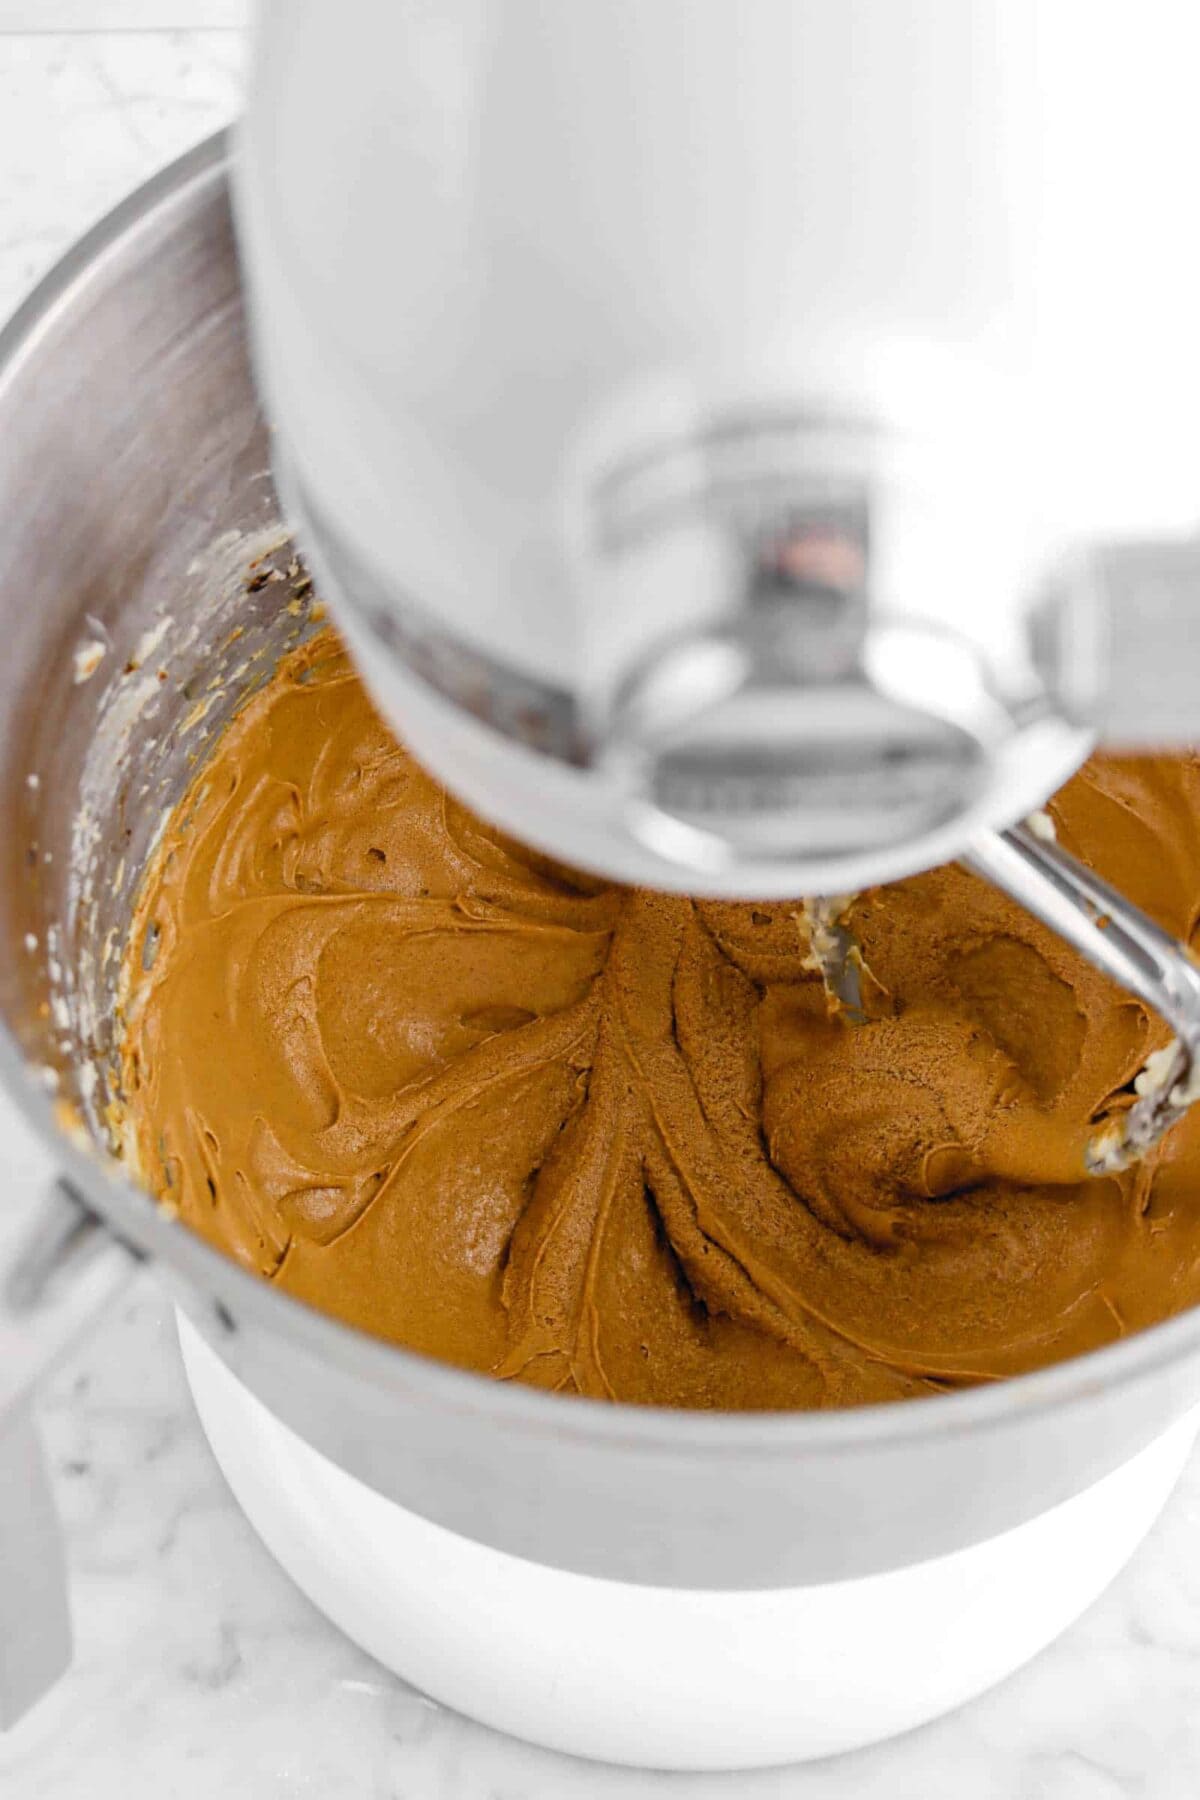 molasses stirred into gingerbread mixture